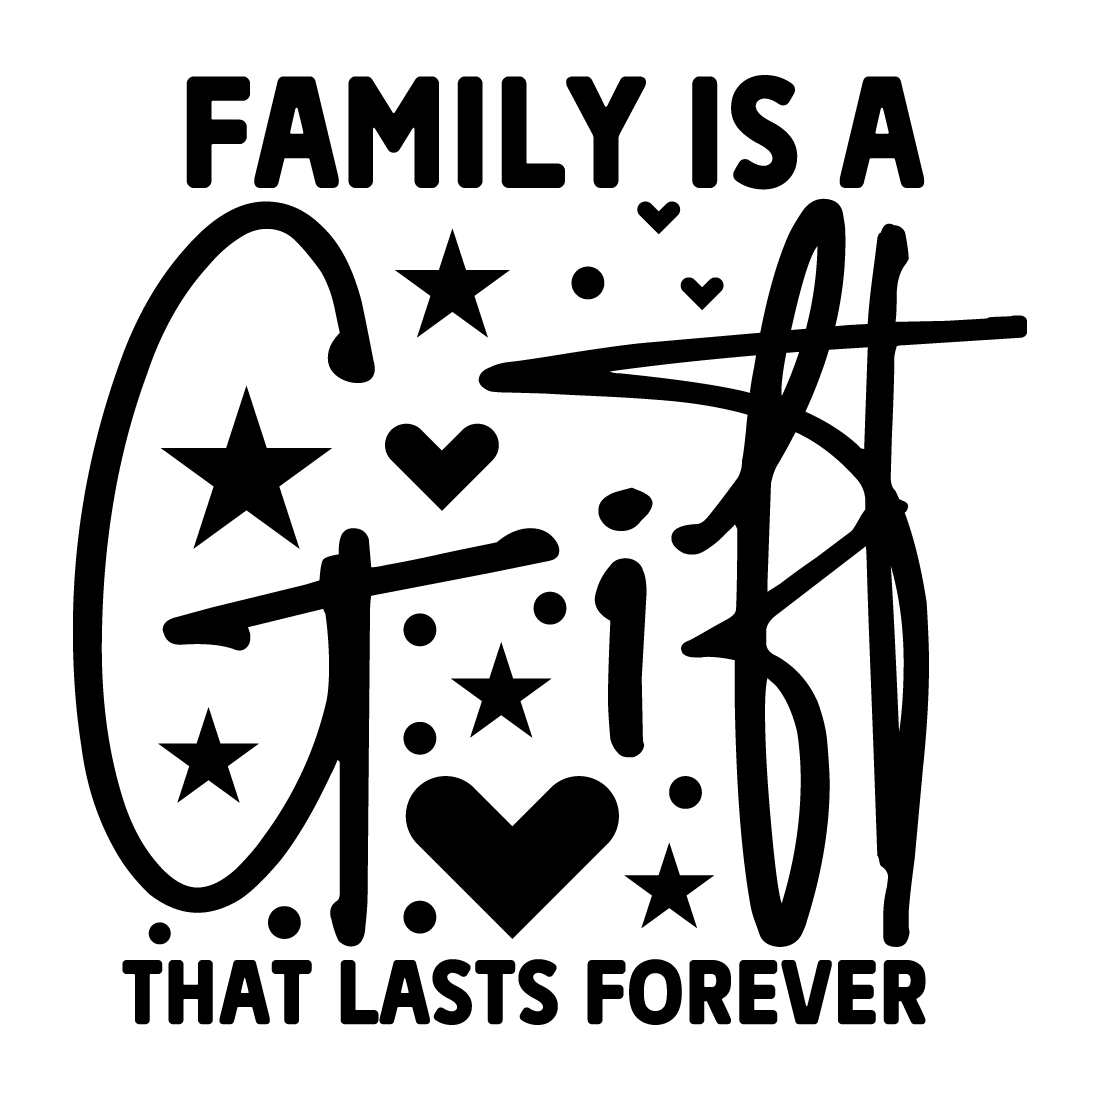 Family is a gift that lasts forever cover image.